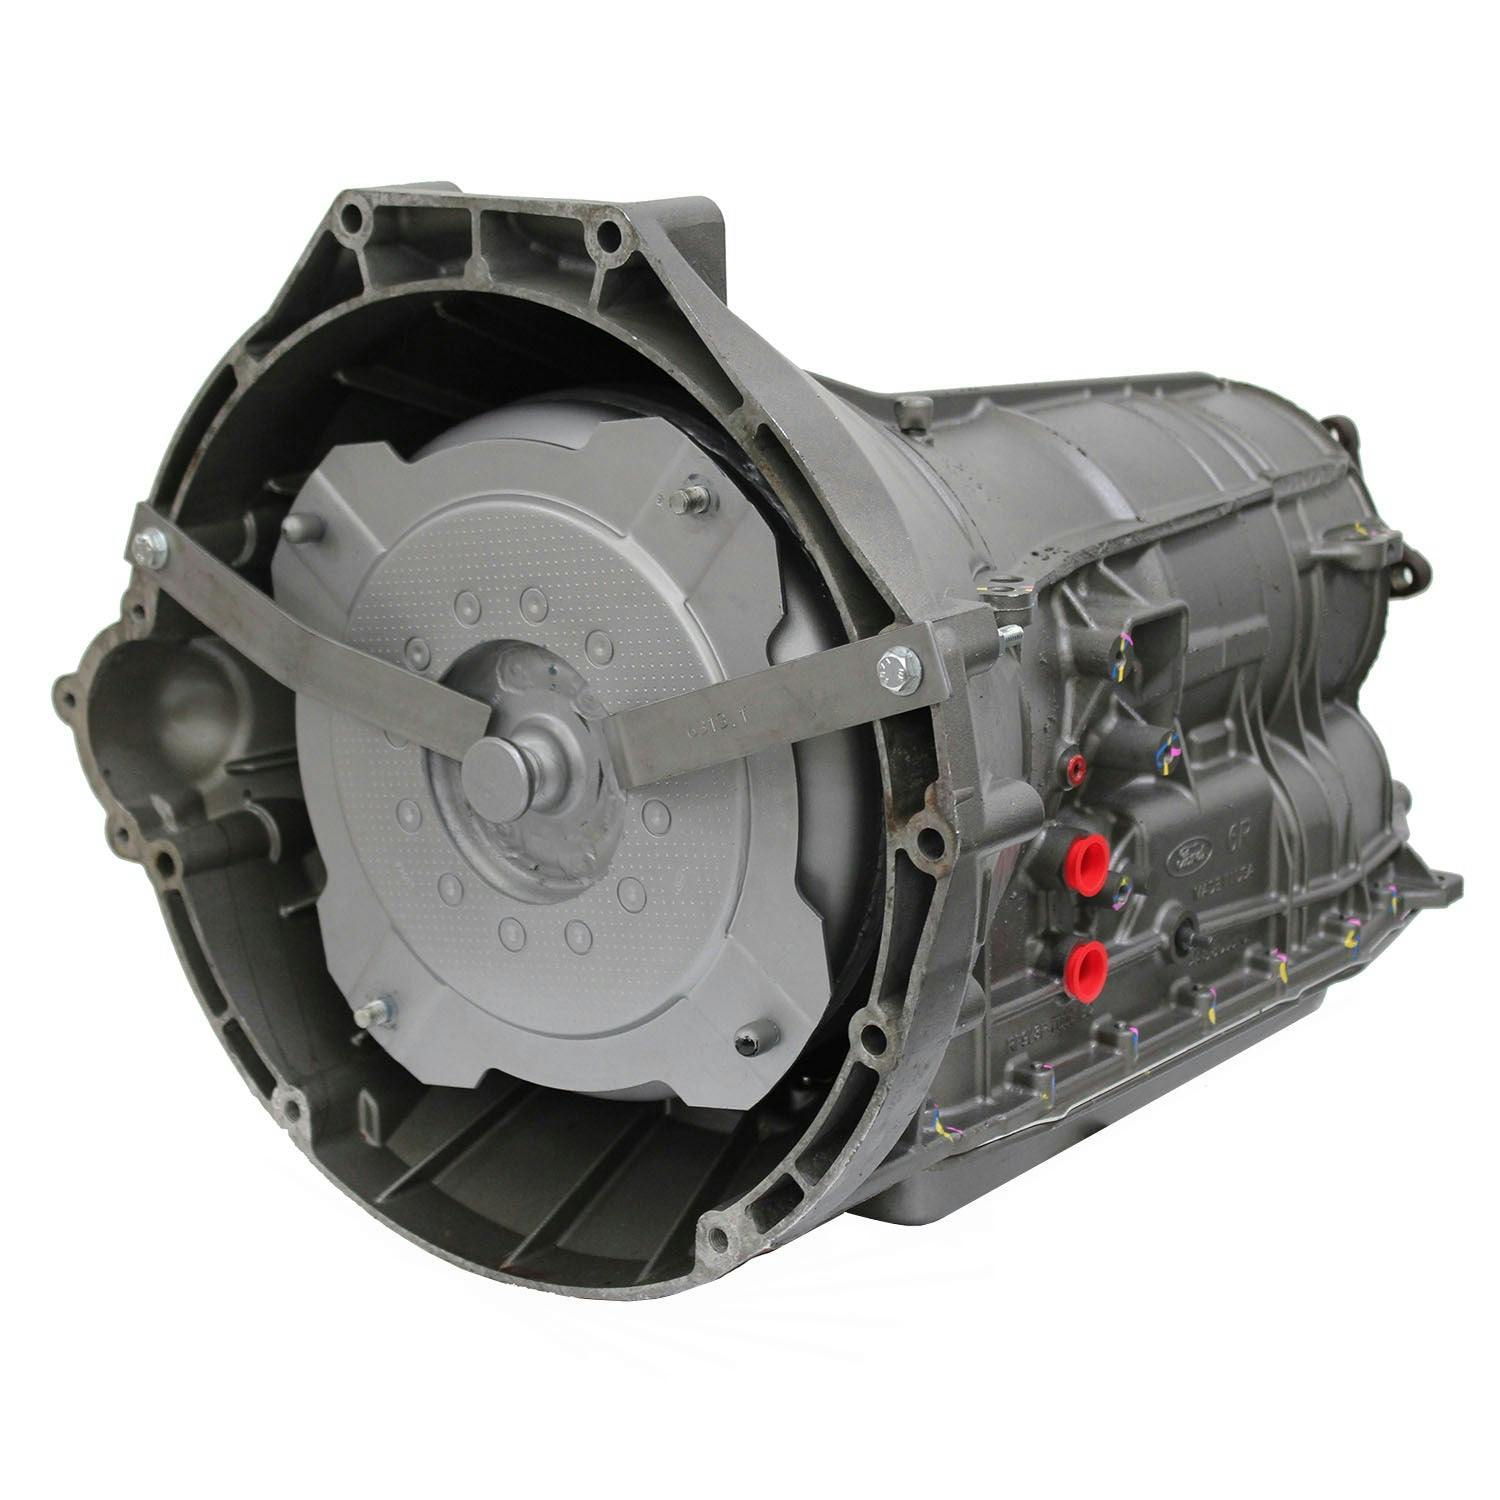 Automatic Transmission for 2008 Ford Explorer/Explorer Sport Trac and Mercury Mountaineer RWD with 4.6L V8 Engine